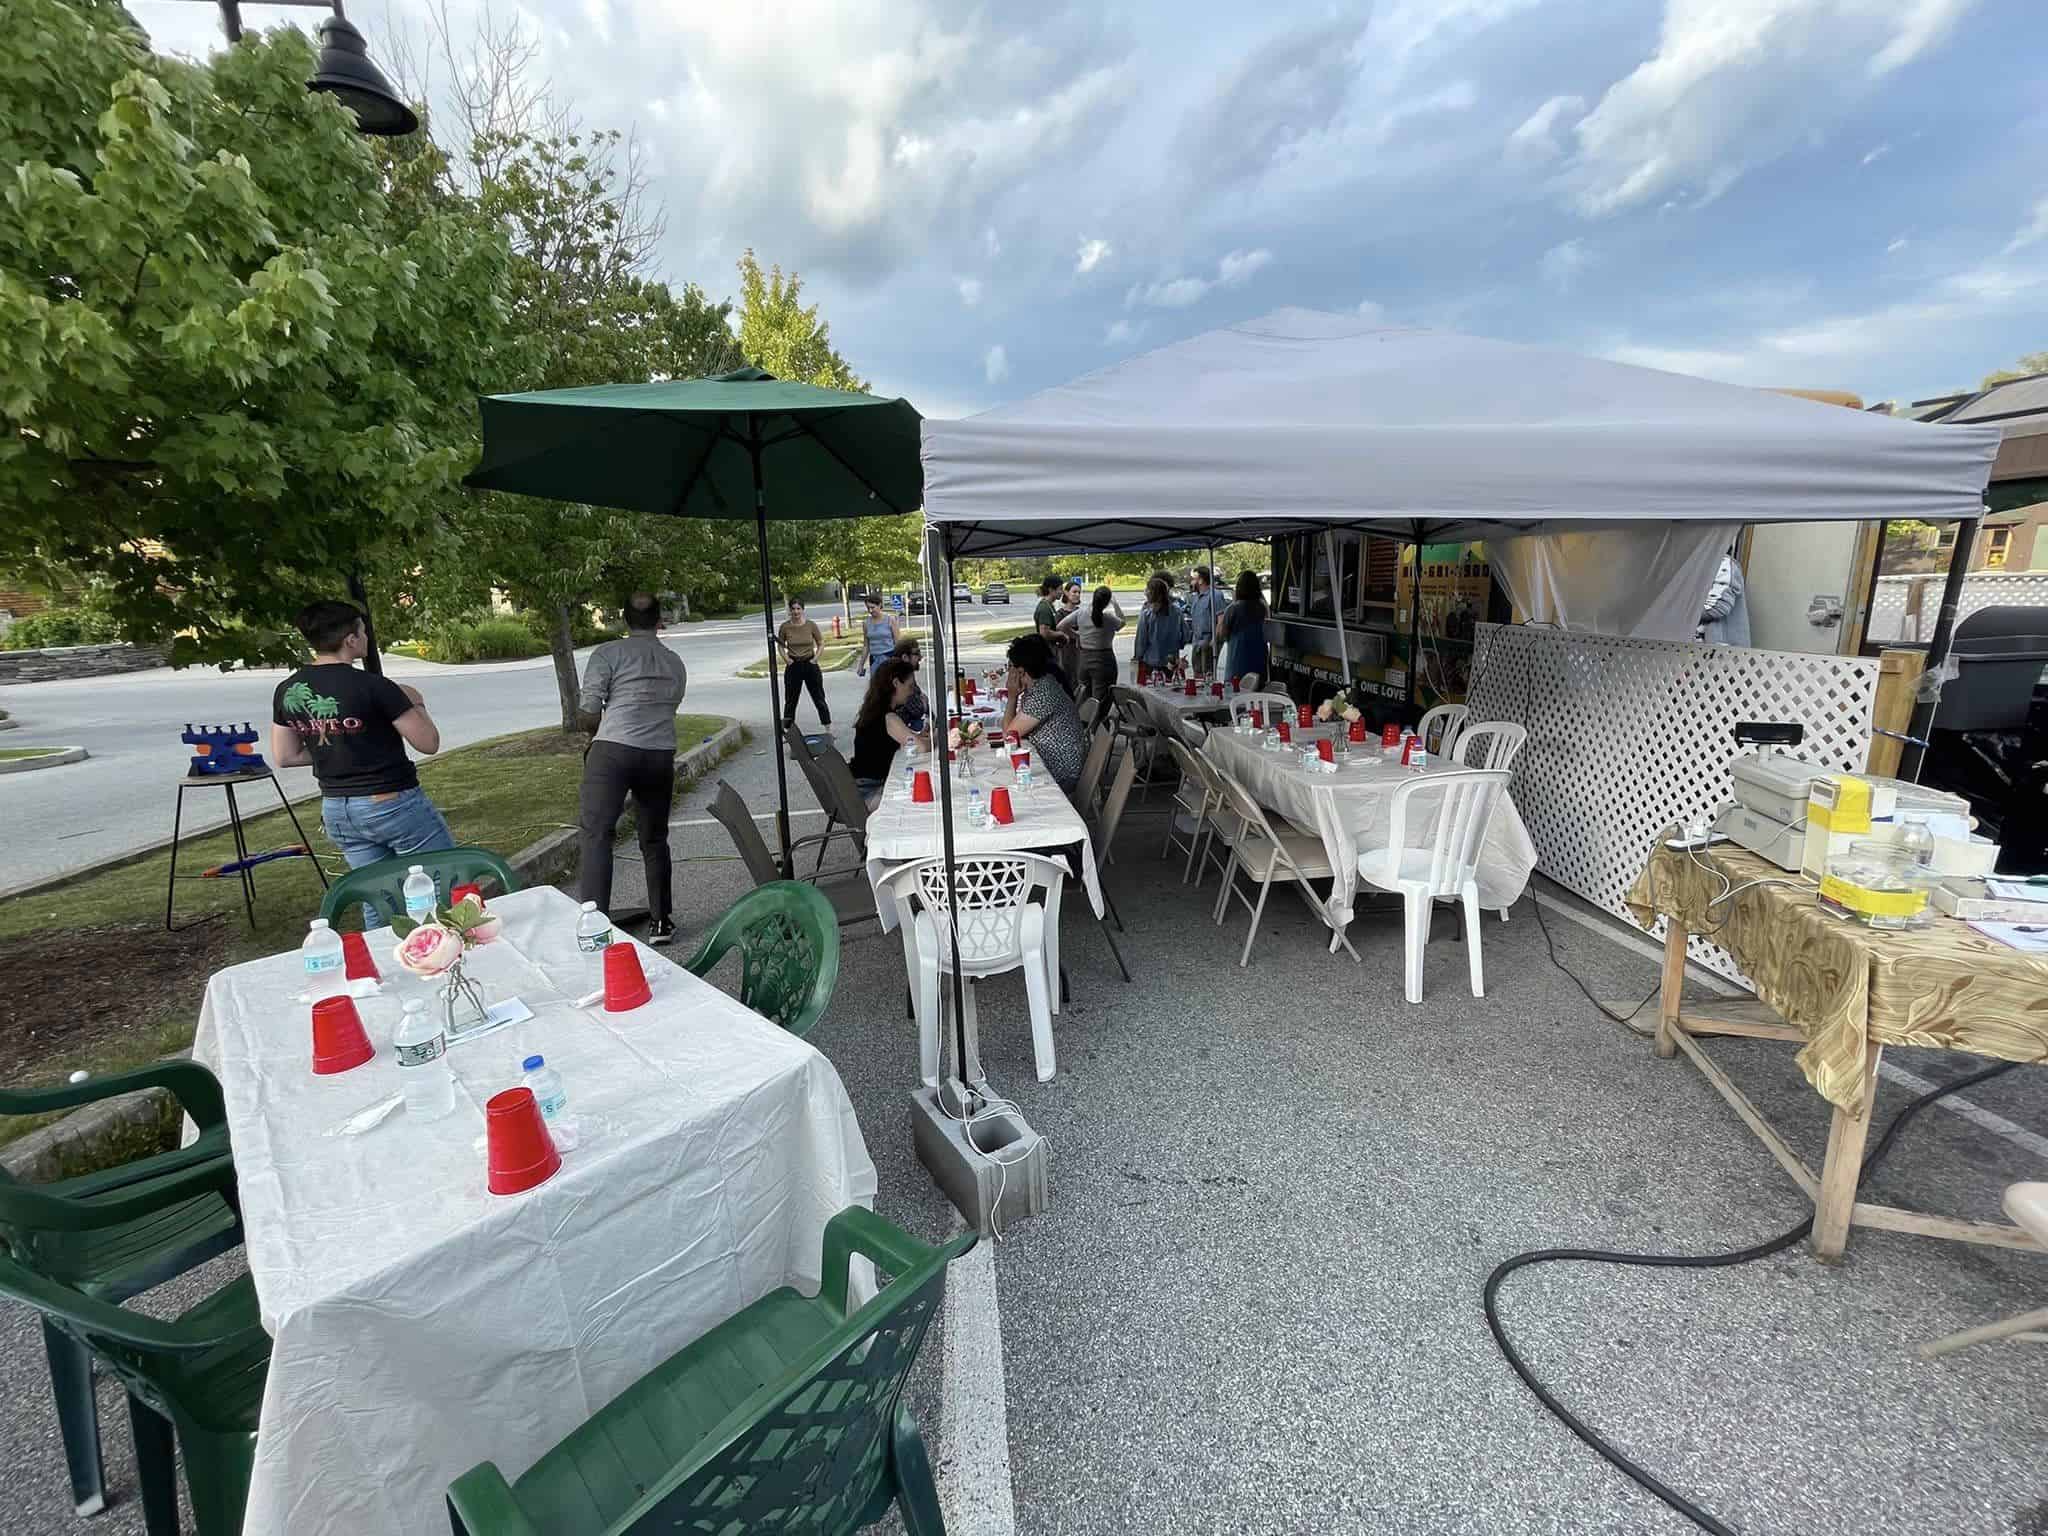 Jamerican Cuisine Food Truck - Outdoor Event Seating with Tents